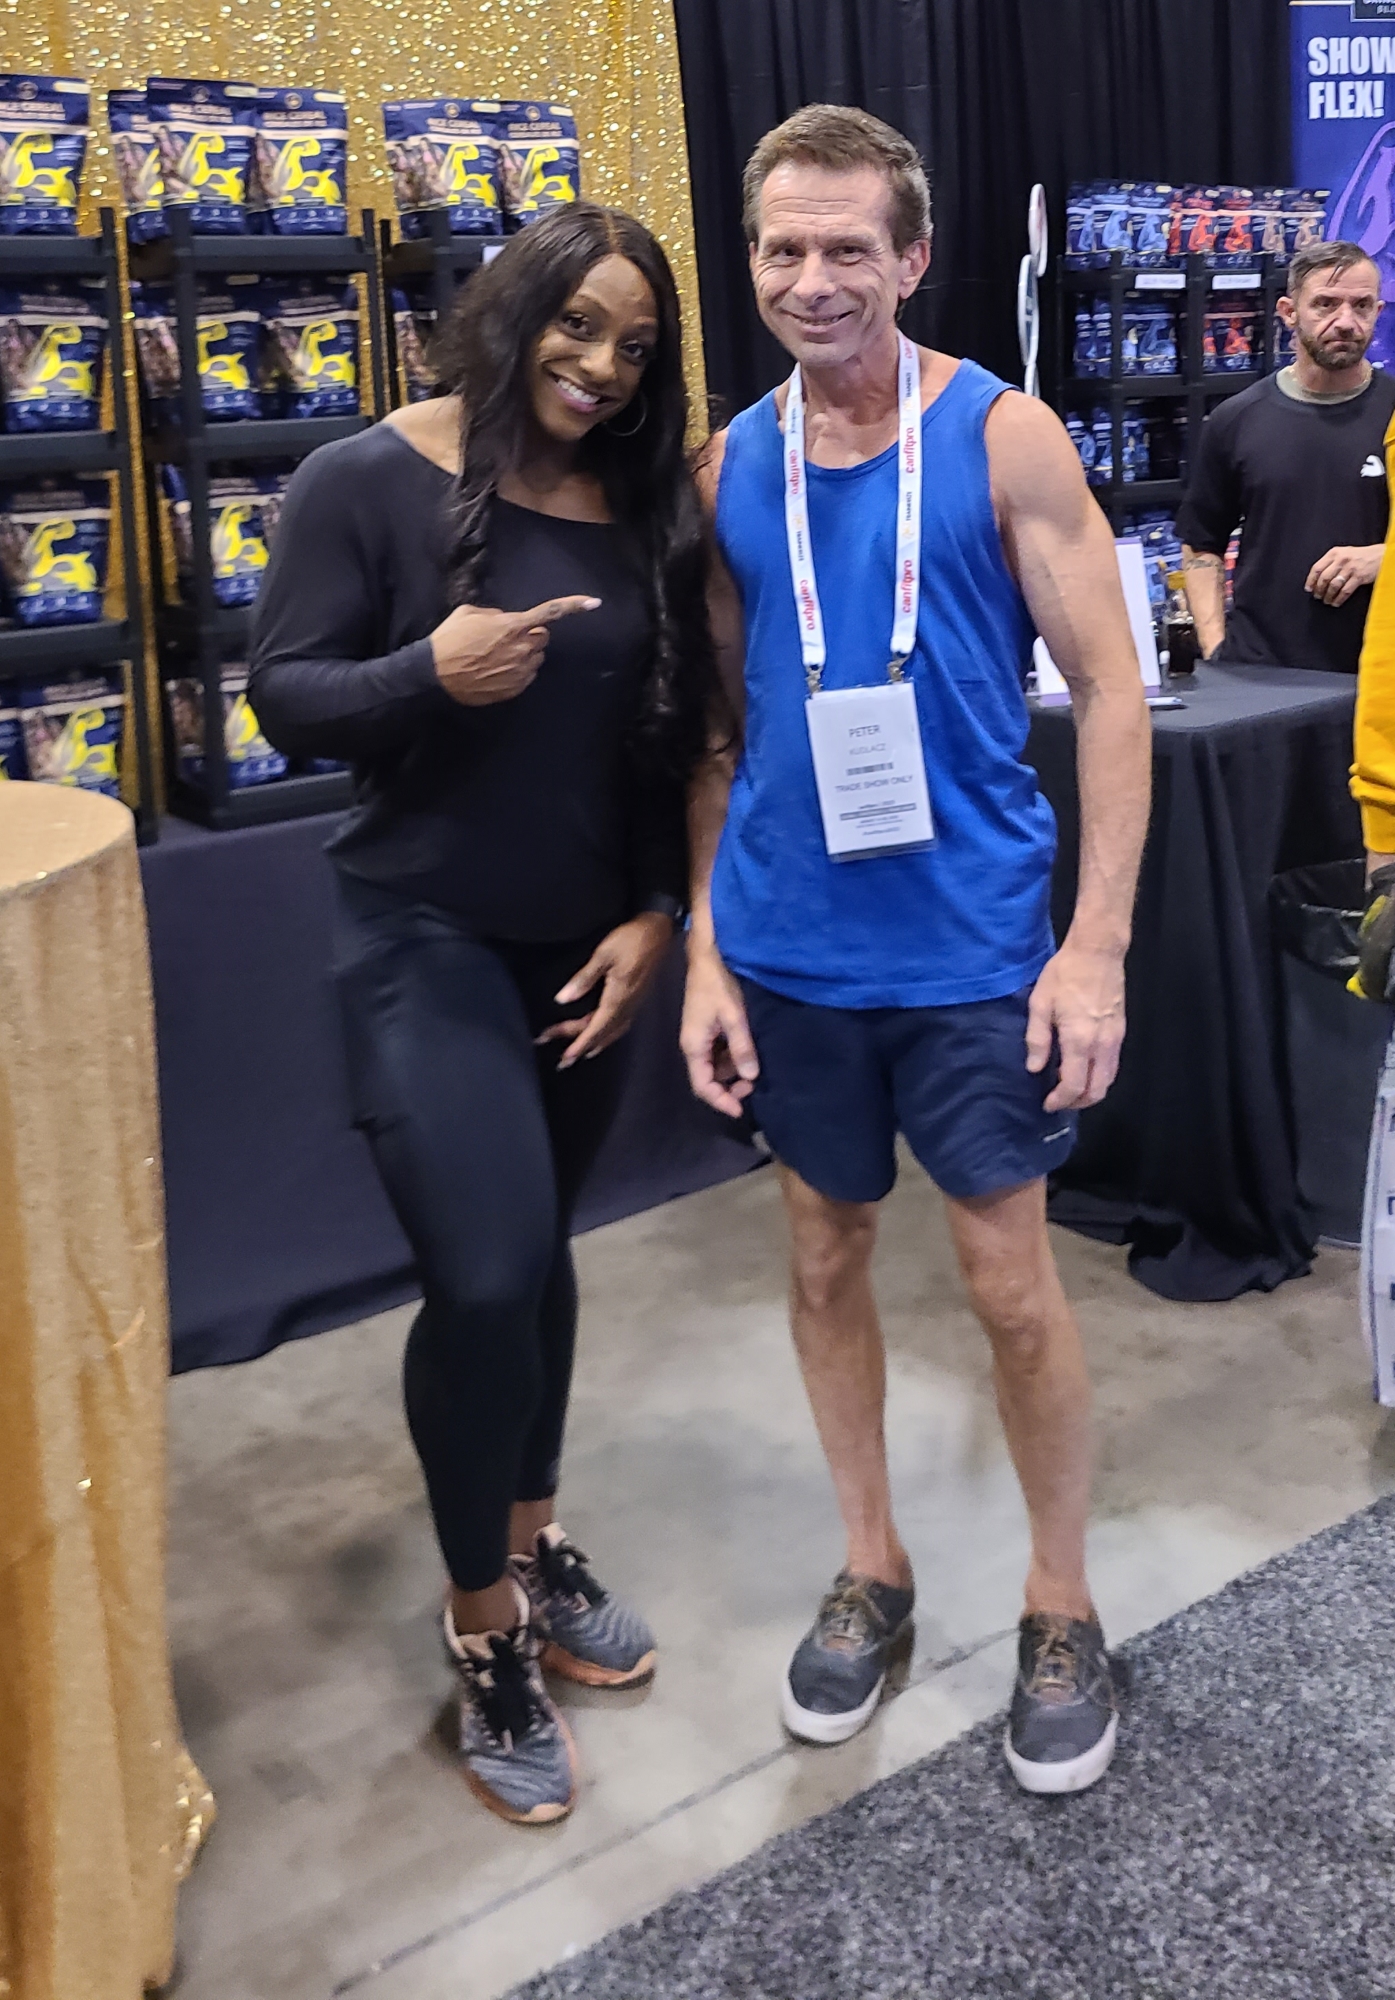 Andrea Shaw - Ms Olympia posing with me